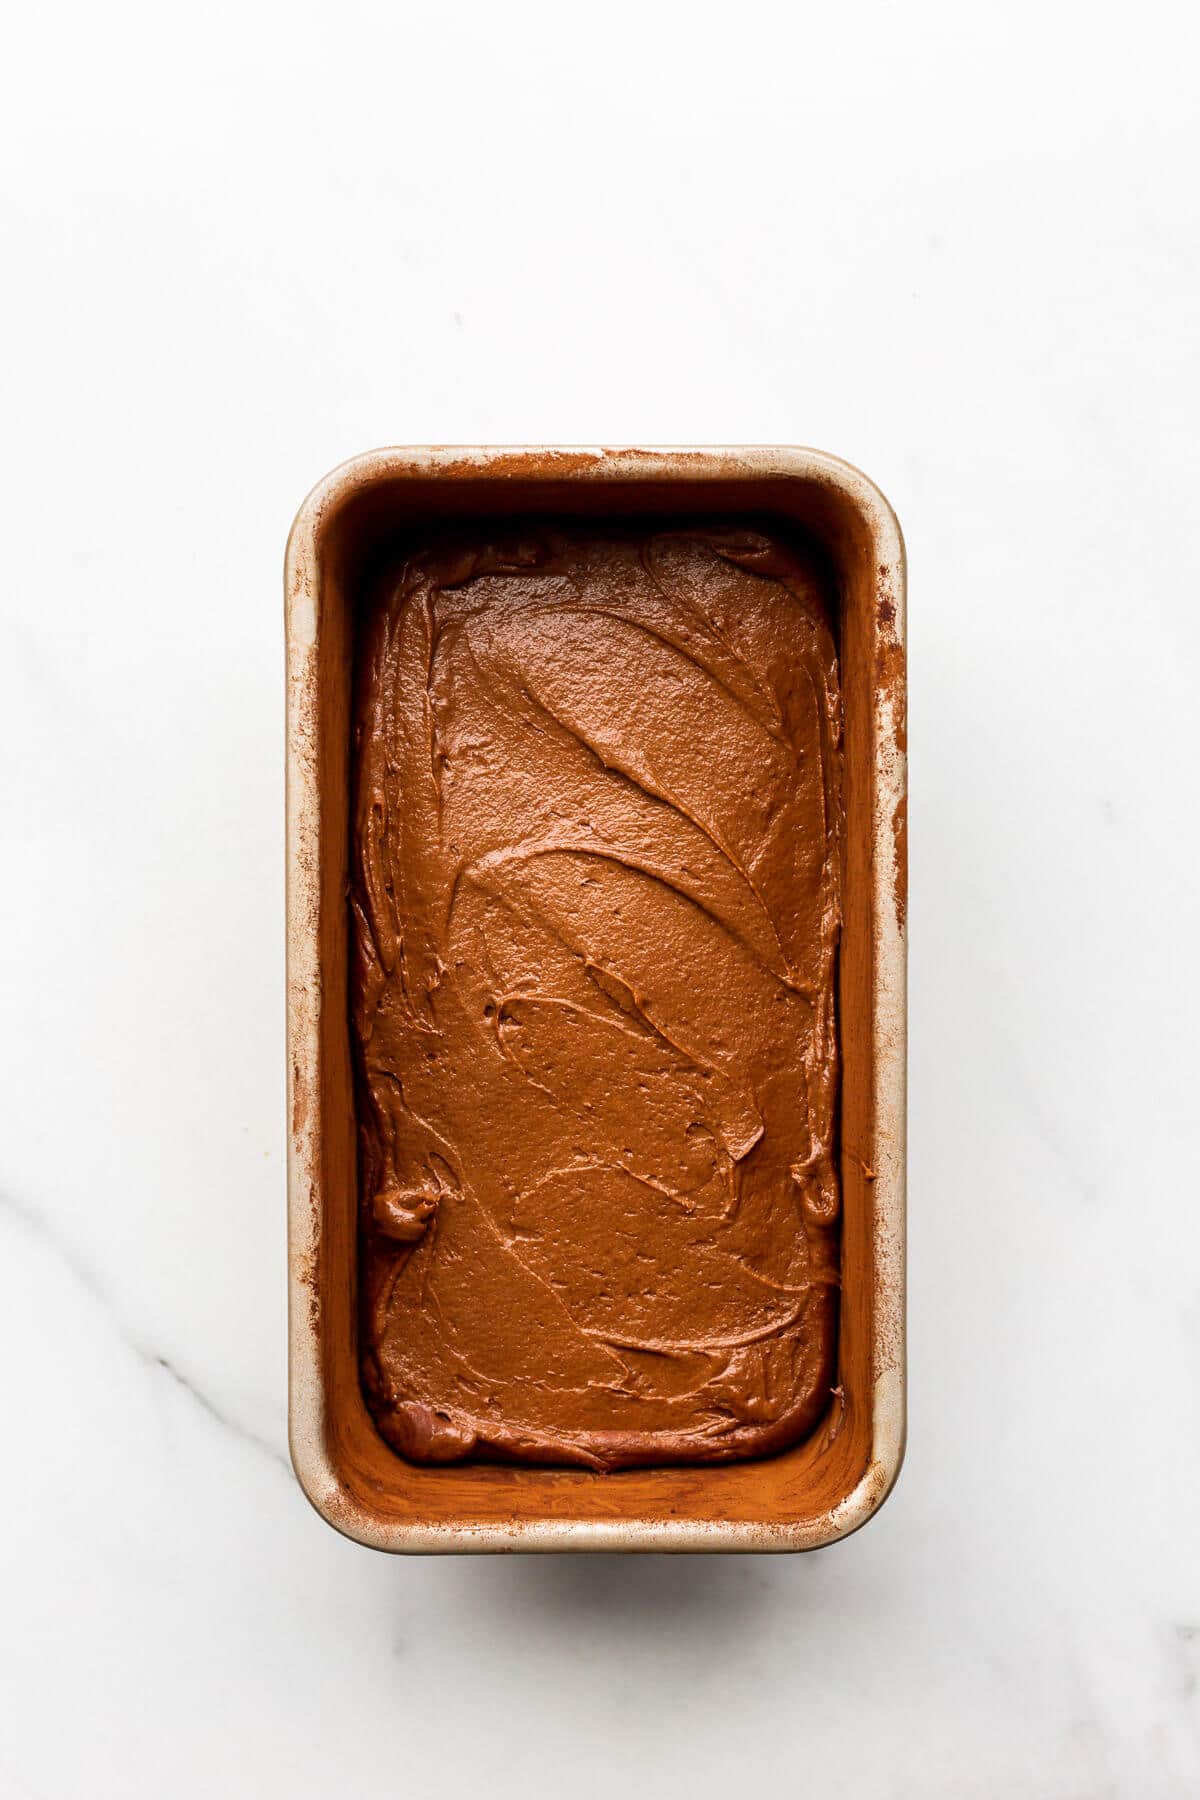 Chocolate cake batter spread evenly in a loaf cake pan, ready to be baked.